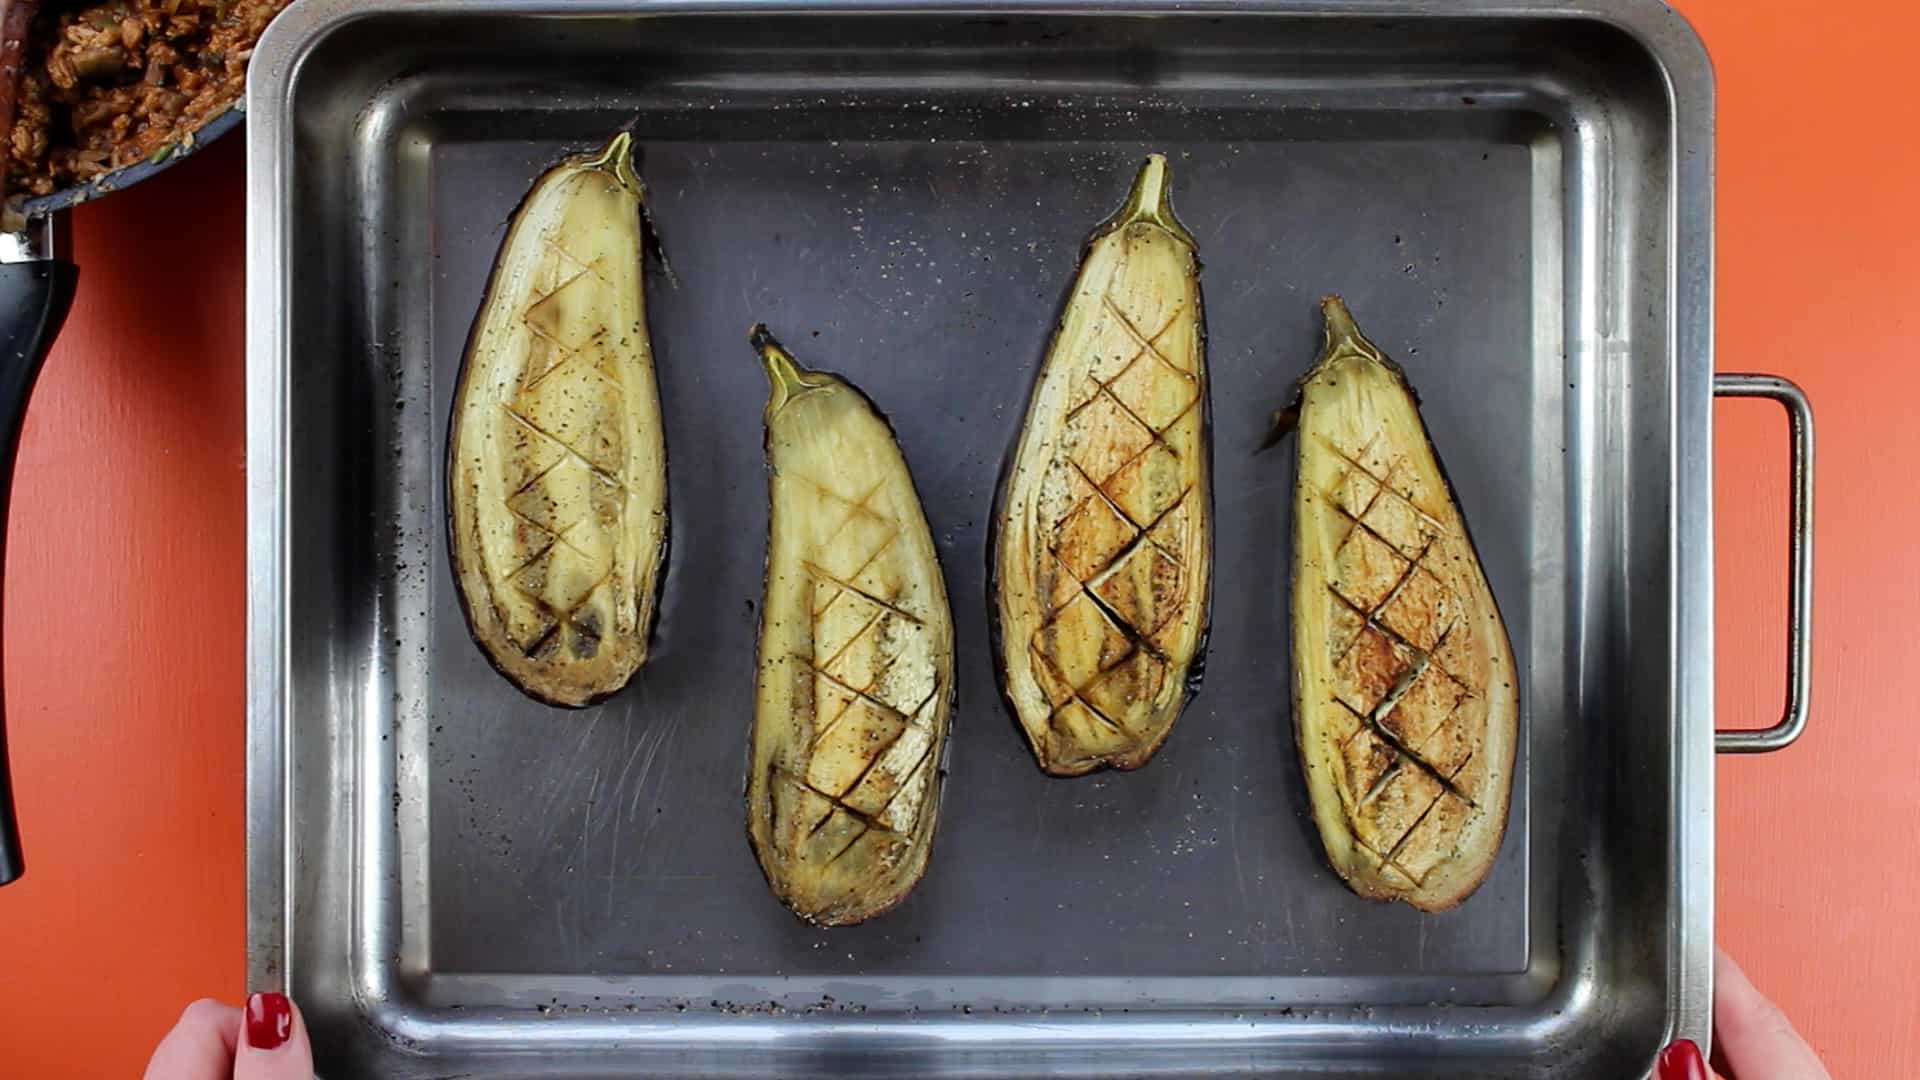 Aubergines baked and golden brown on top